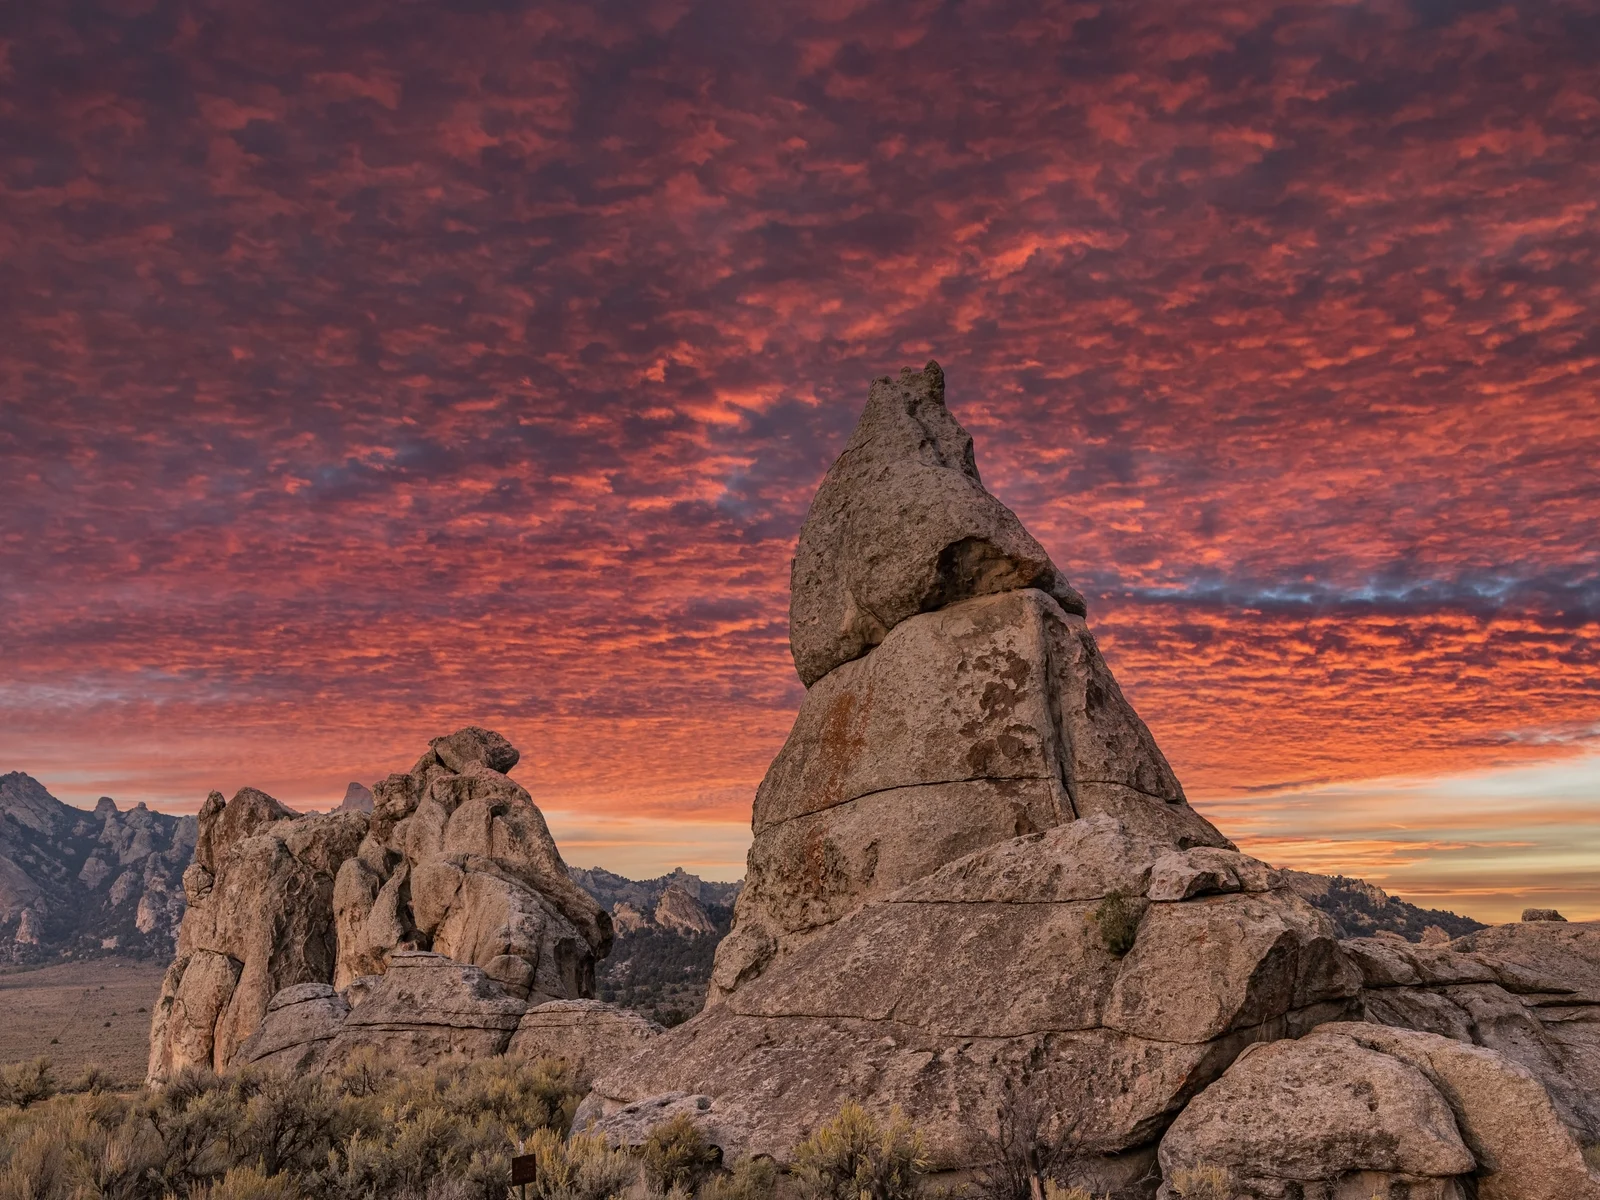 One of the best things to see in Idaho, crimson sunset setting the huge rock formation in City Of Rocks National Reserve